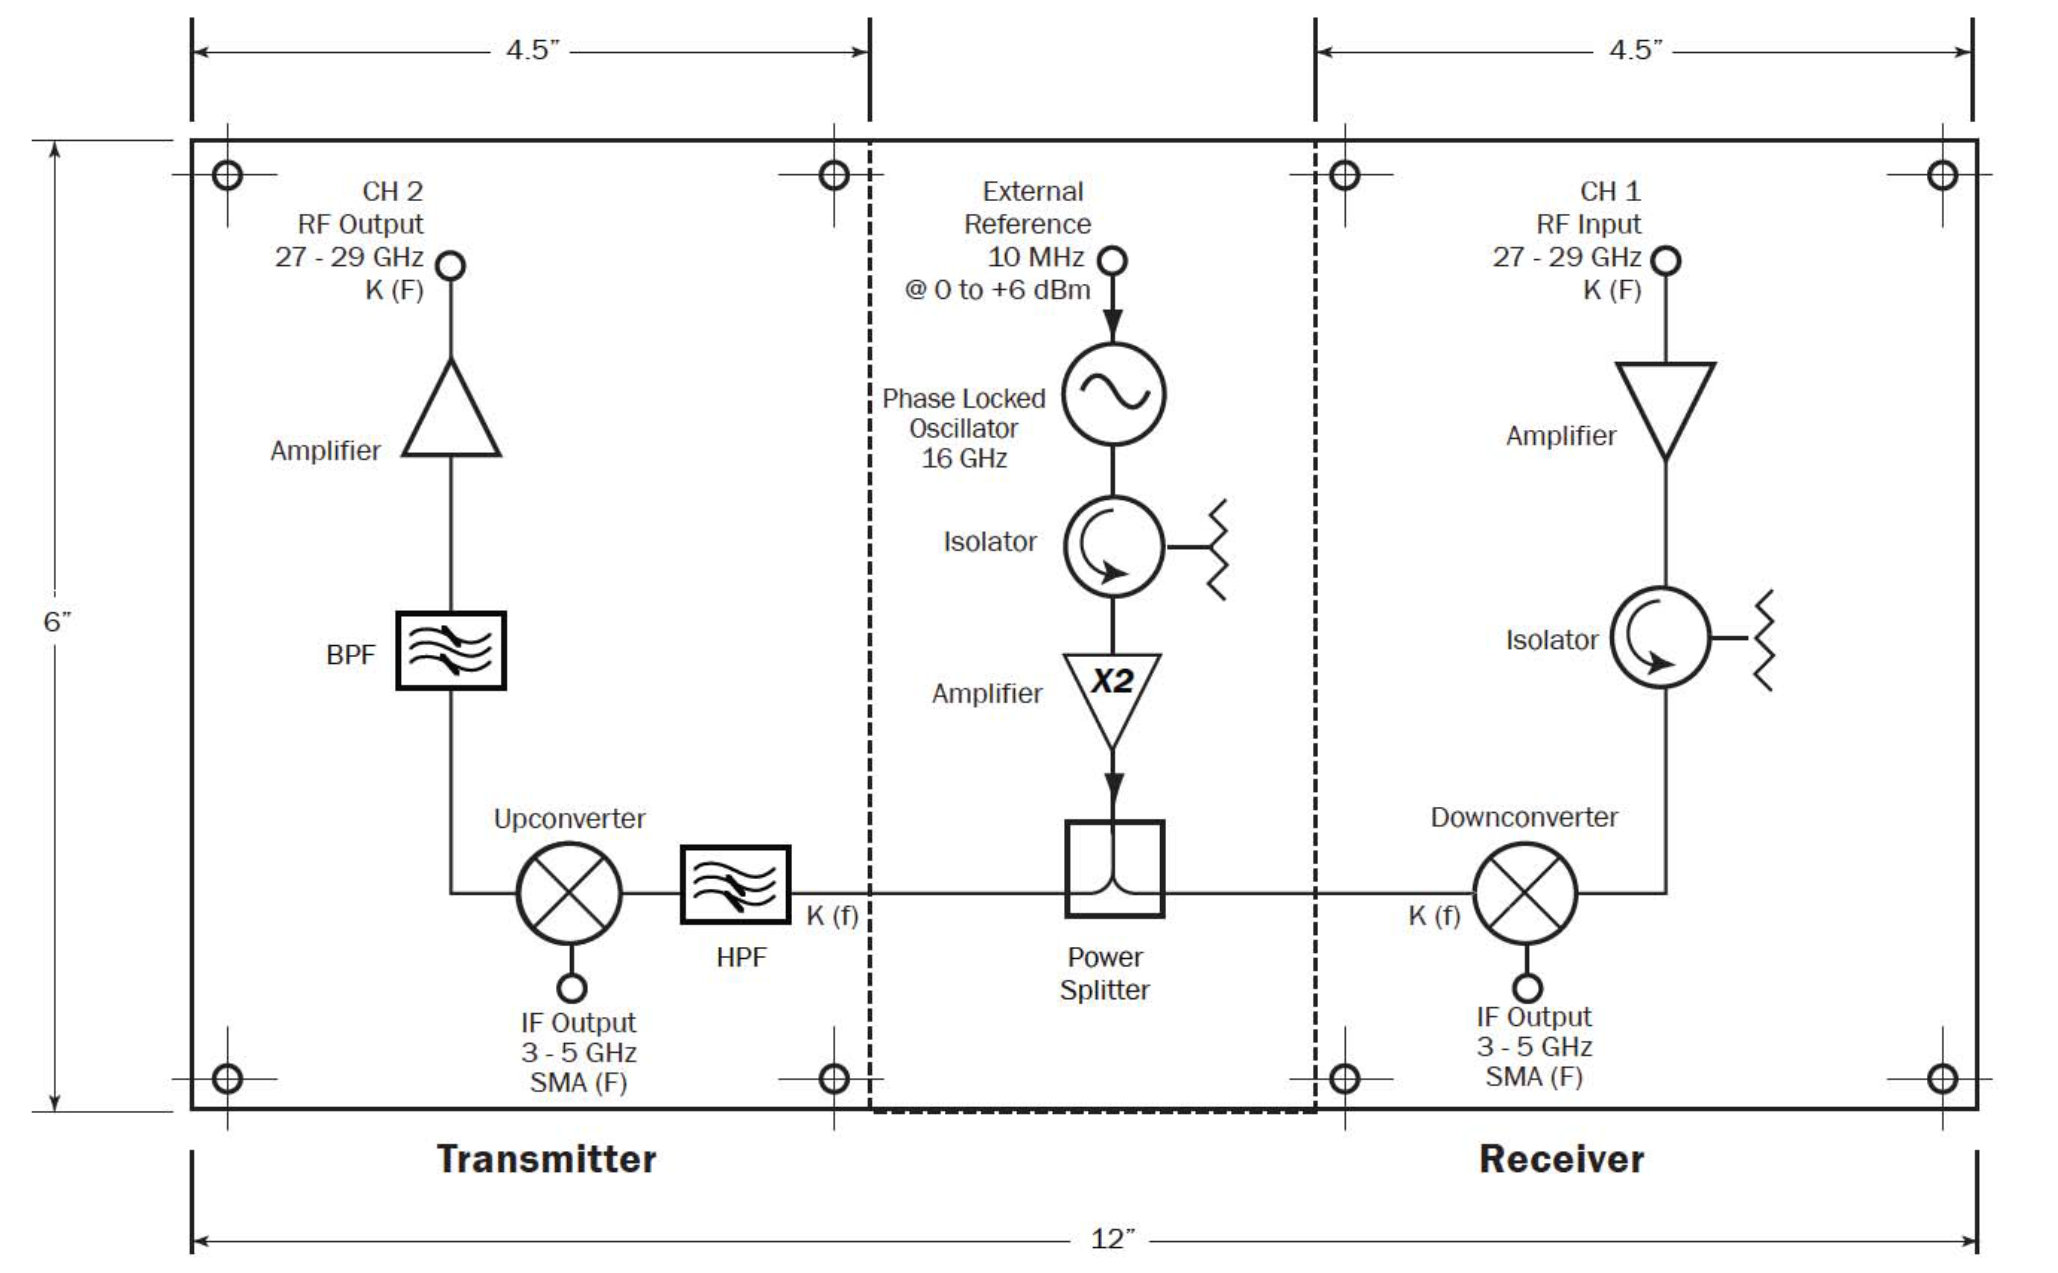 Figure 1: 2-Channel Ka Band Transceiver Block Diagram and Plate Layout (SpaceK Labs)